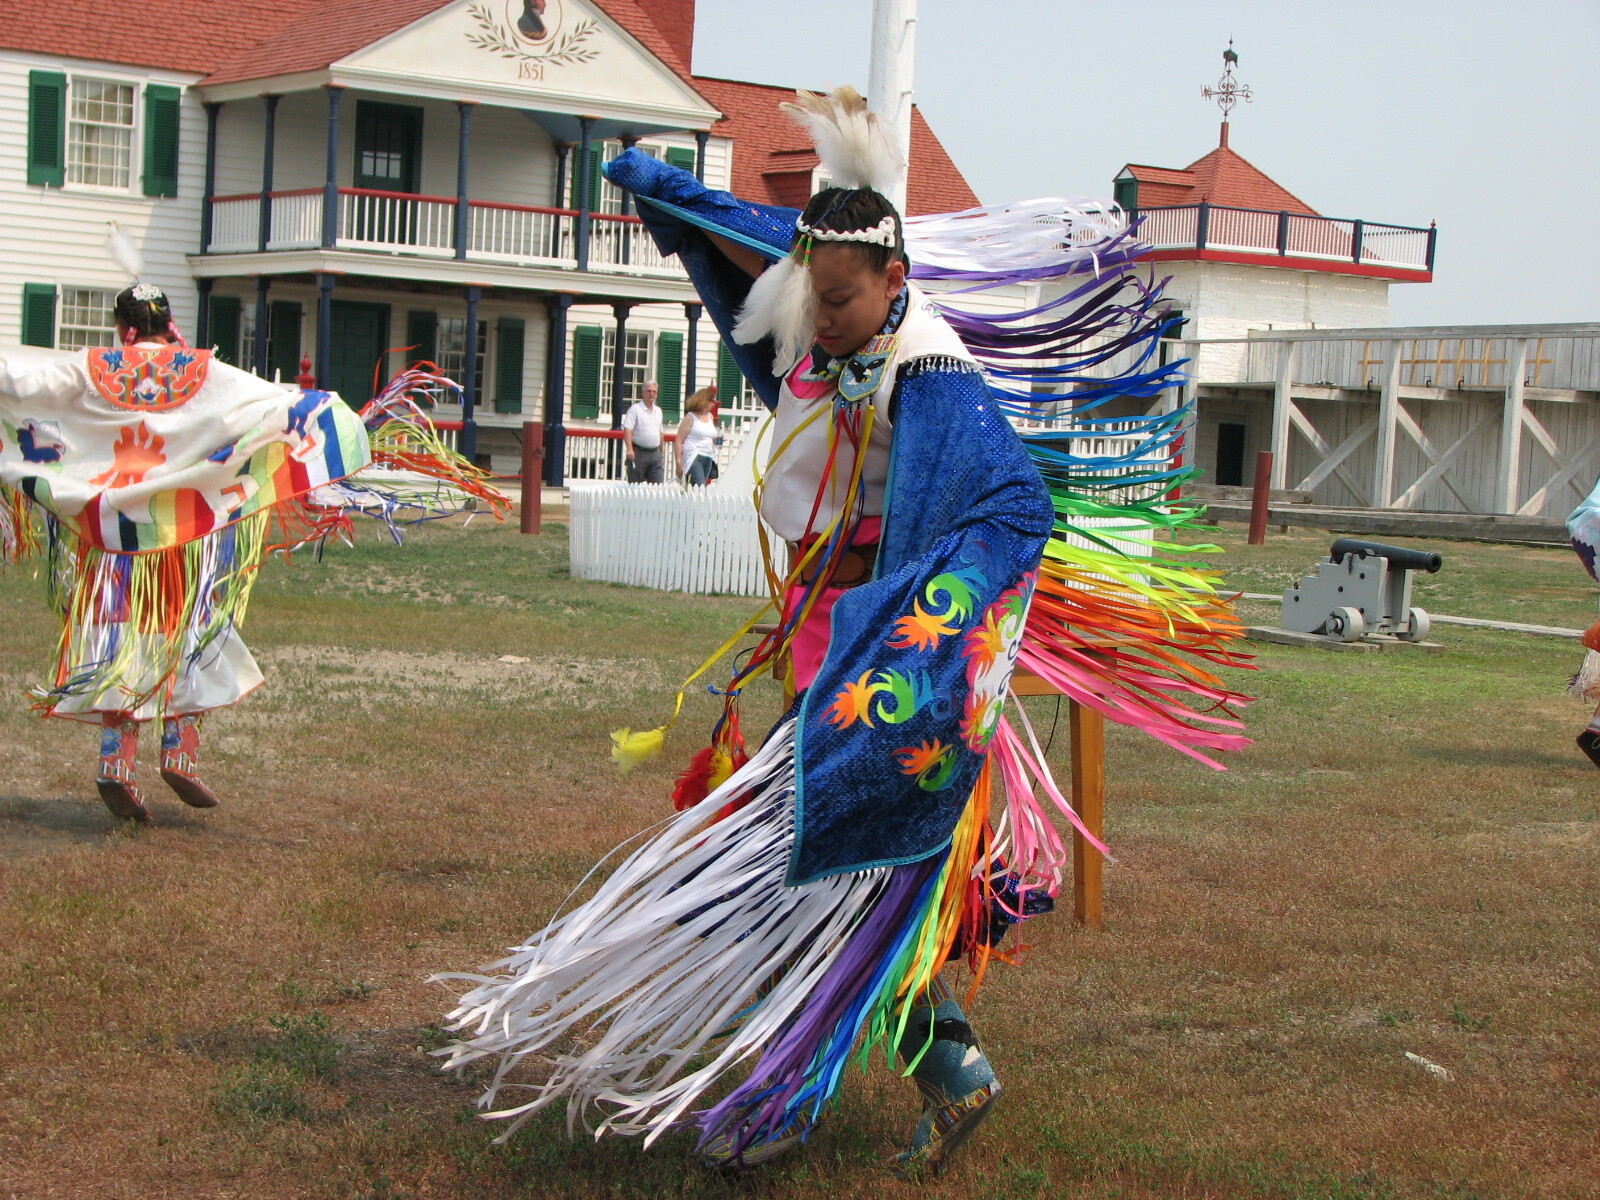 Girls in traditional American Indian dress with shalls that have long rainbow fringe dance